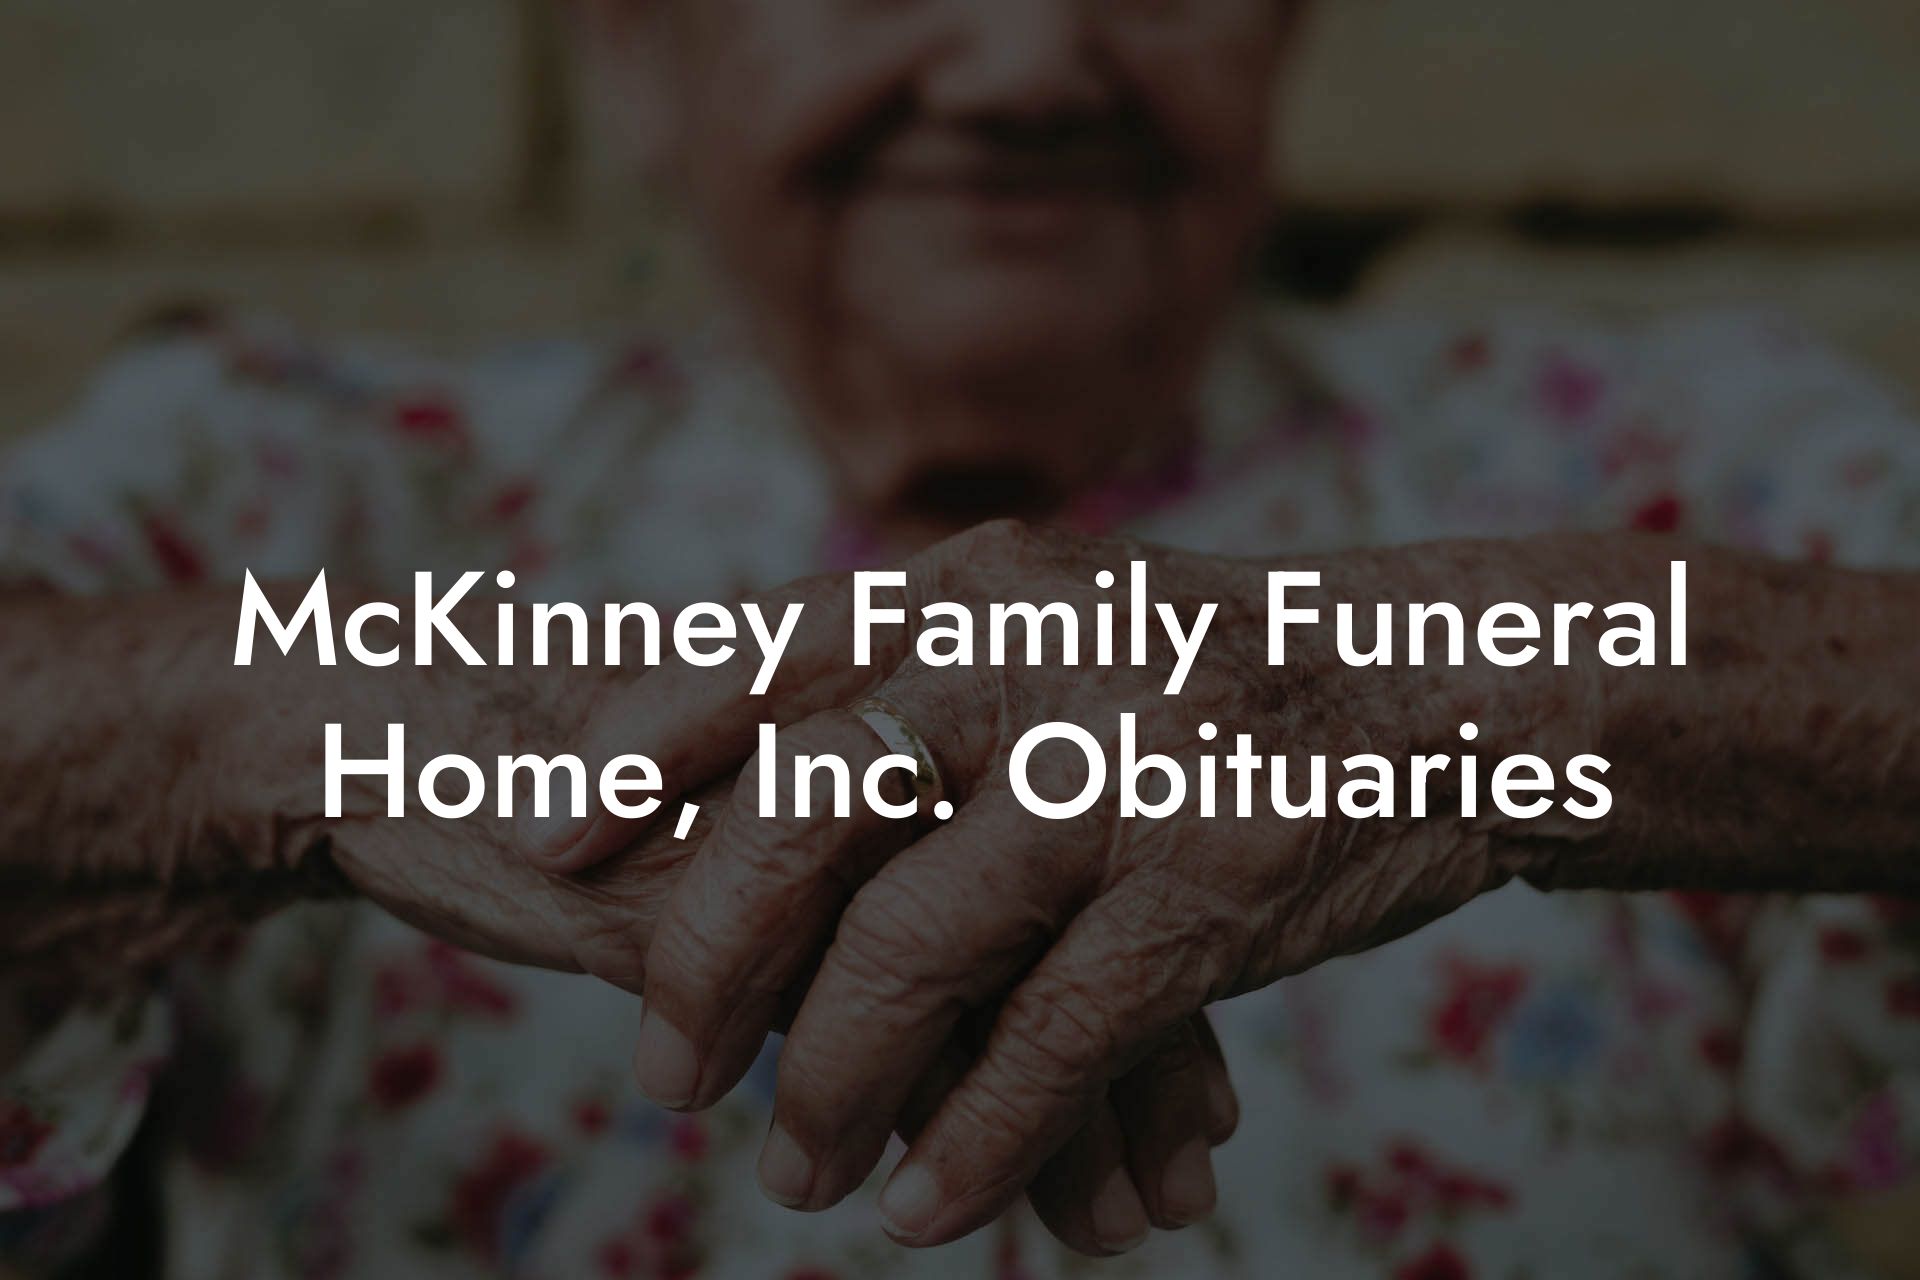 McKinney Family Funeral Home, Inc. Obituaries